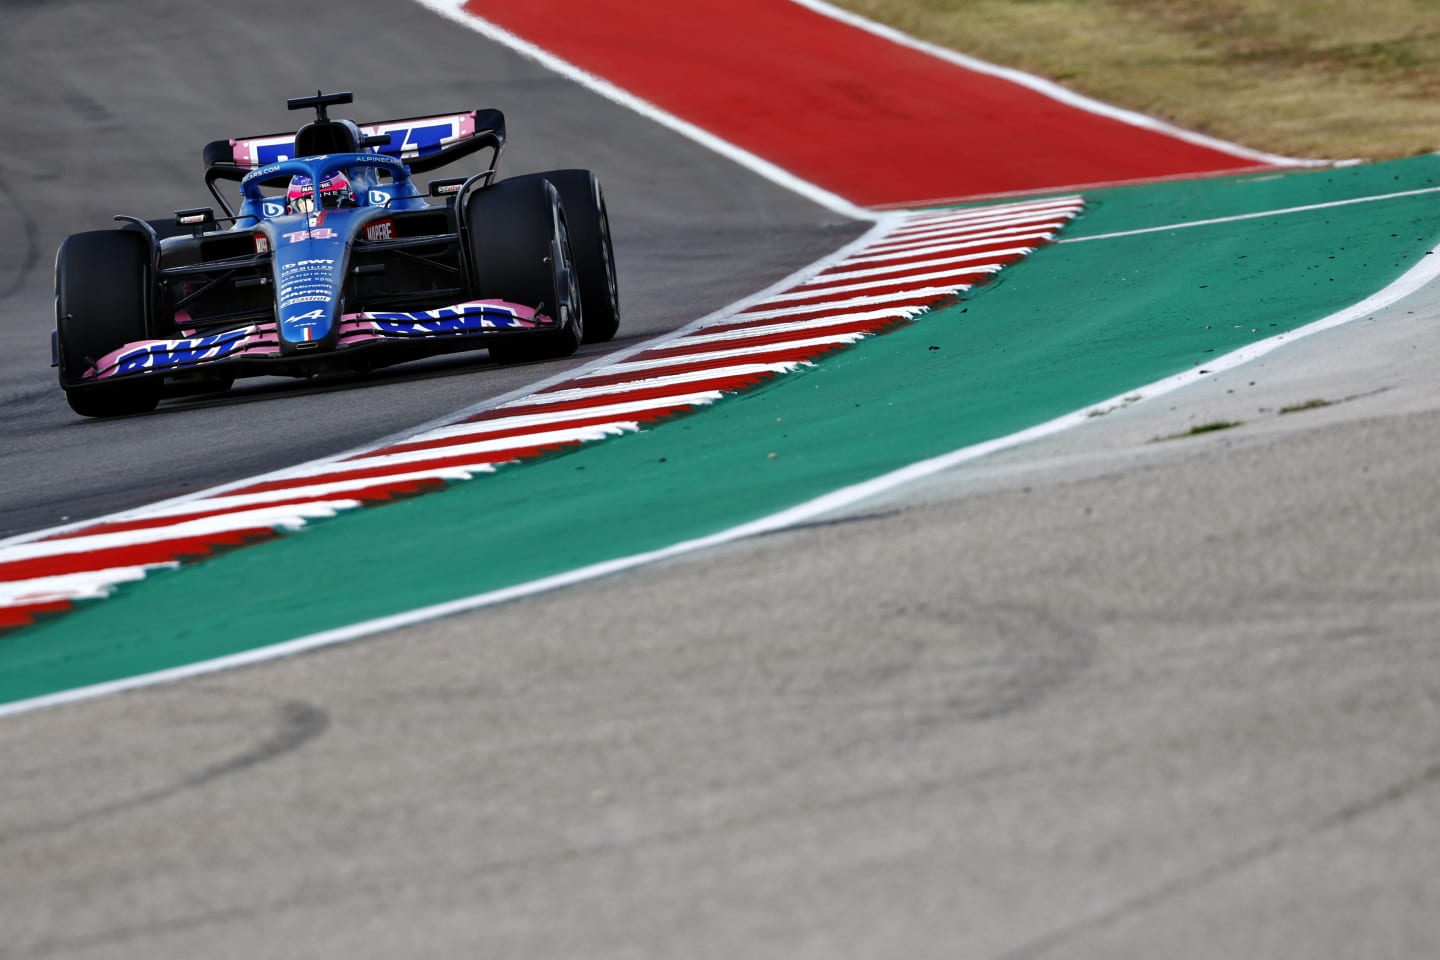 AUSTIN, TEXAS - OCTOBER 23: Fernando Alonso of Spain driving the (14) Alpine F1 A522 Renault on track during the F1 Grand Prix of USA at Circuit of The Americas on October 23, 2022 in Austin, Texas. (Photo by Chris Graythen/Getty Images)